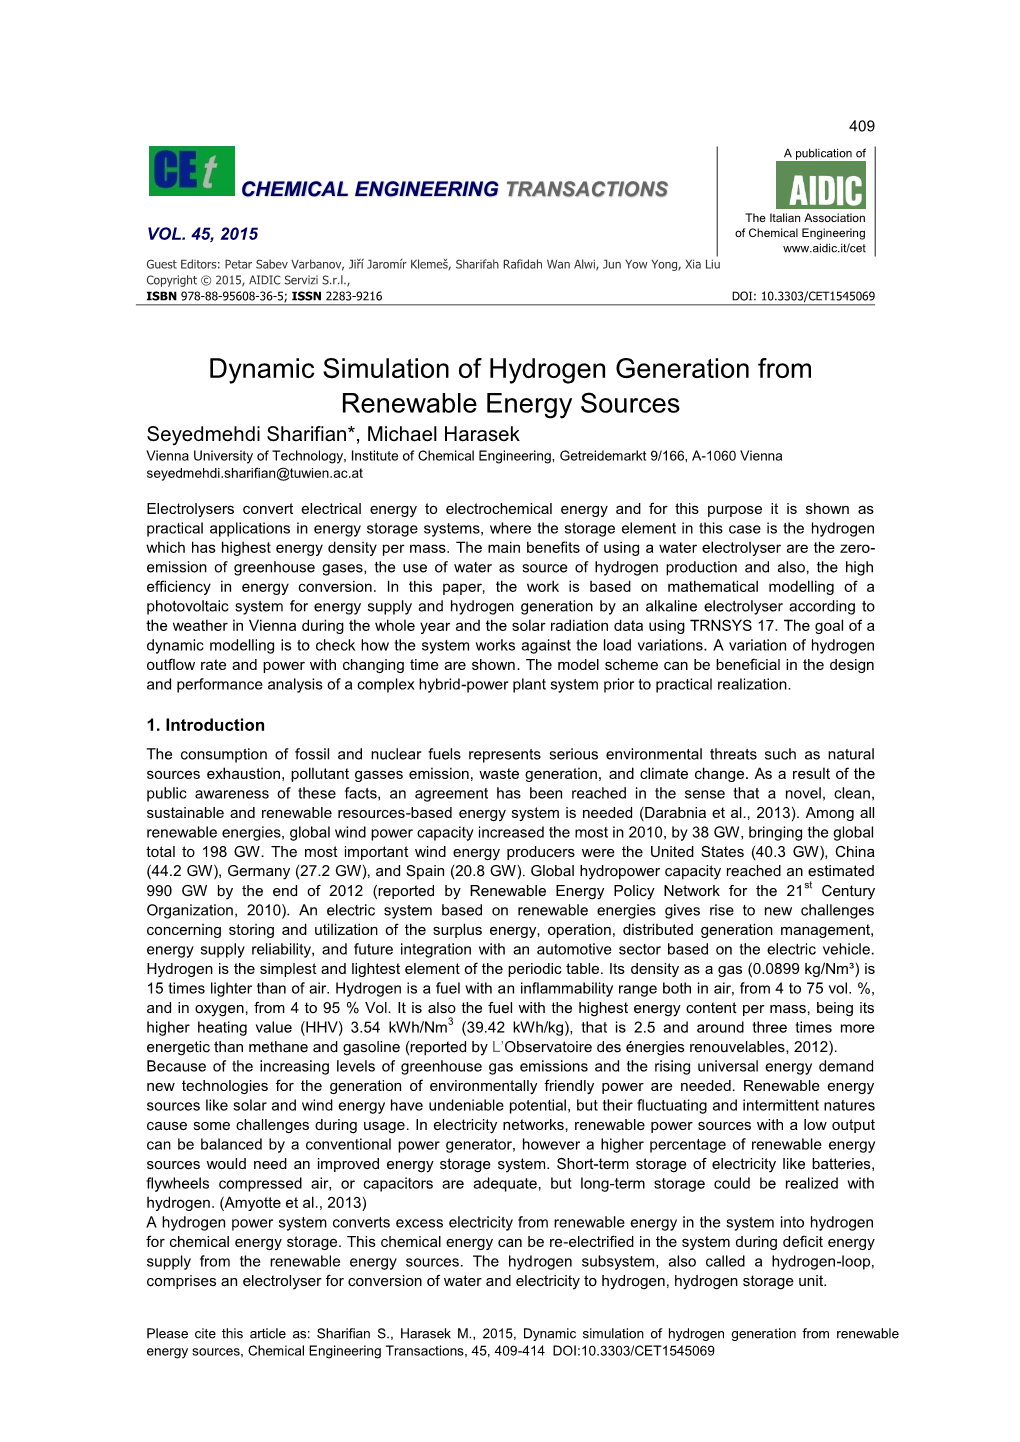 Dynamic Simulation of Hydrogen Generation from Renewable Energy Sources